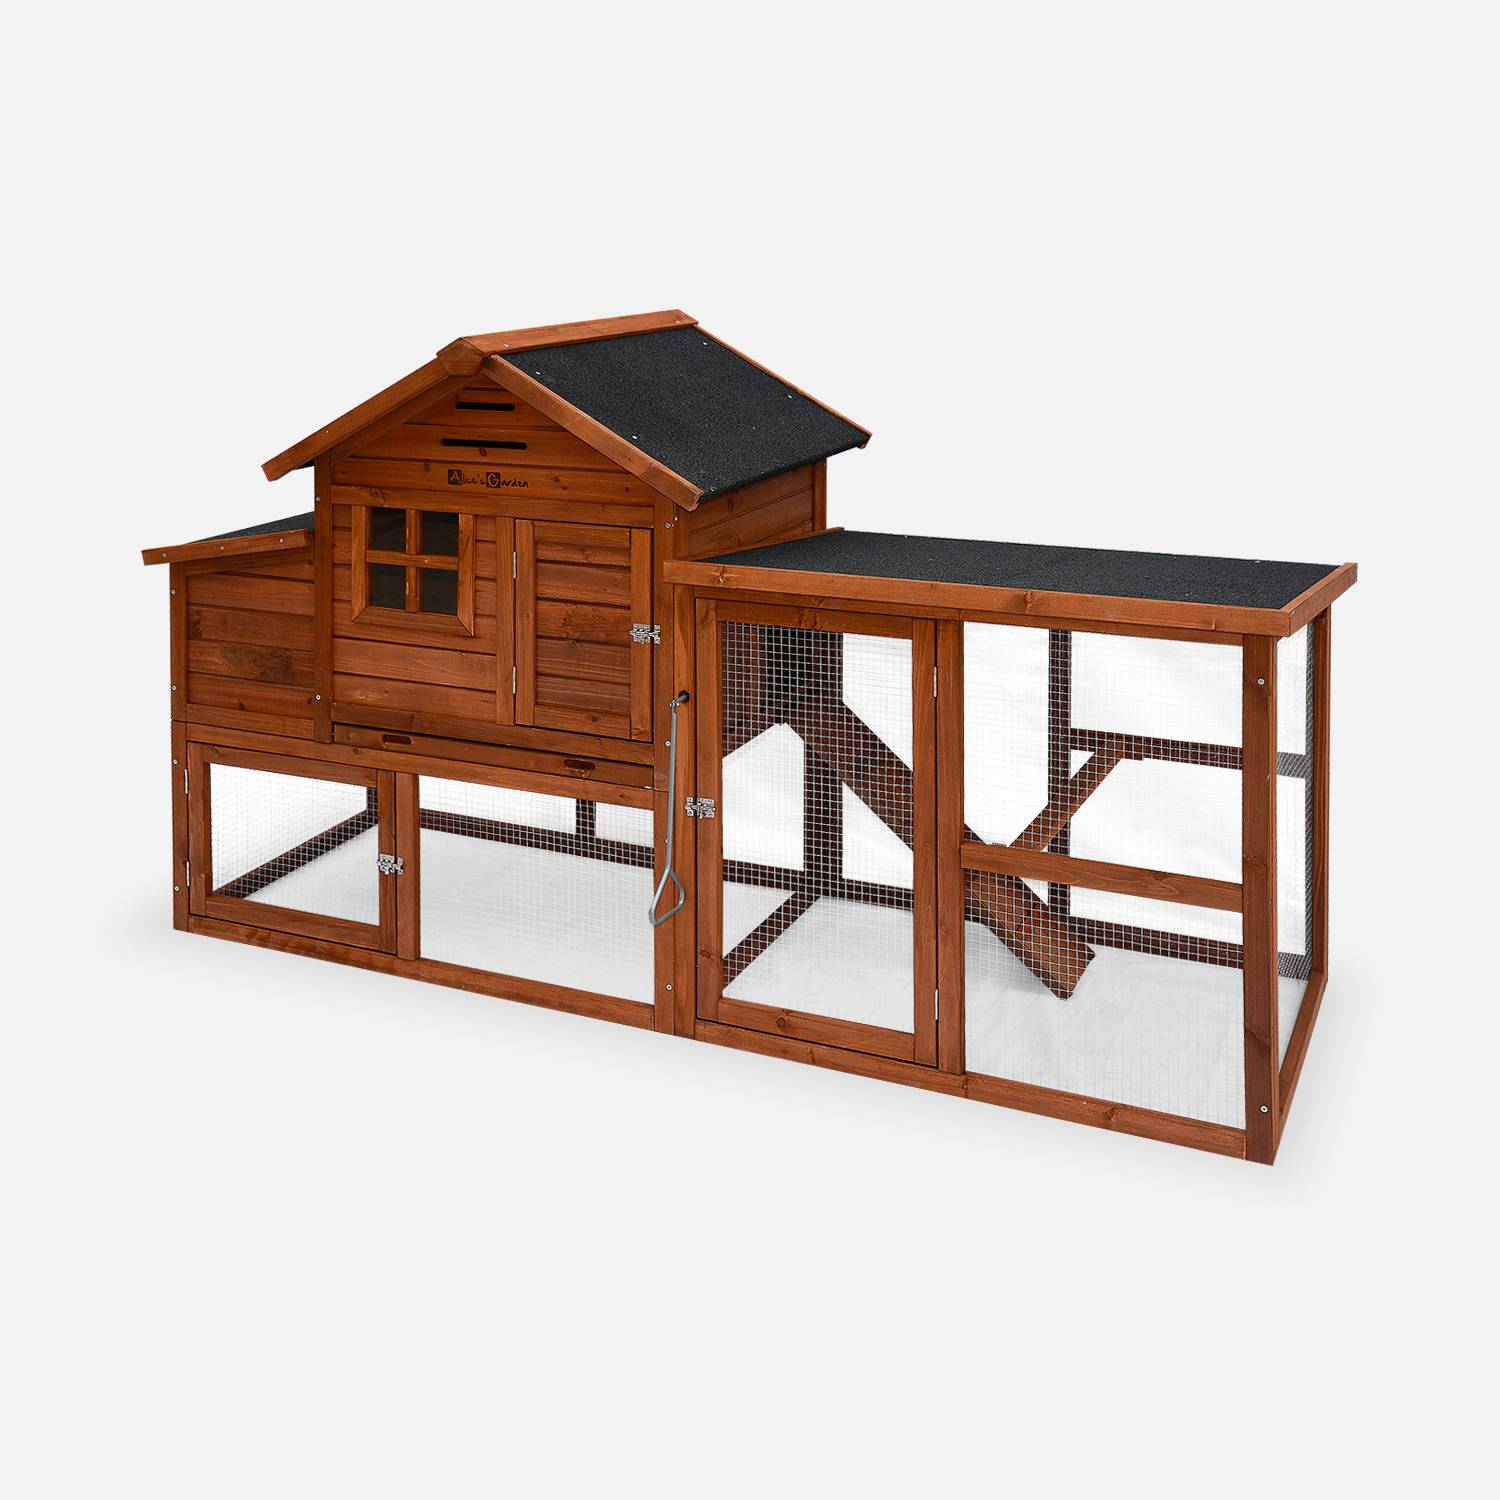 Wooden chicken coop for 4 chickens with nesting box, 195.5x75.5x116.5cm - Geline - Wood colour,sweeek,Photo5